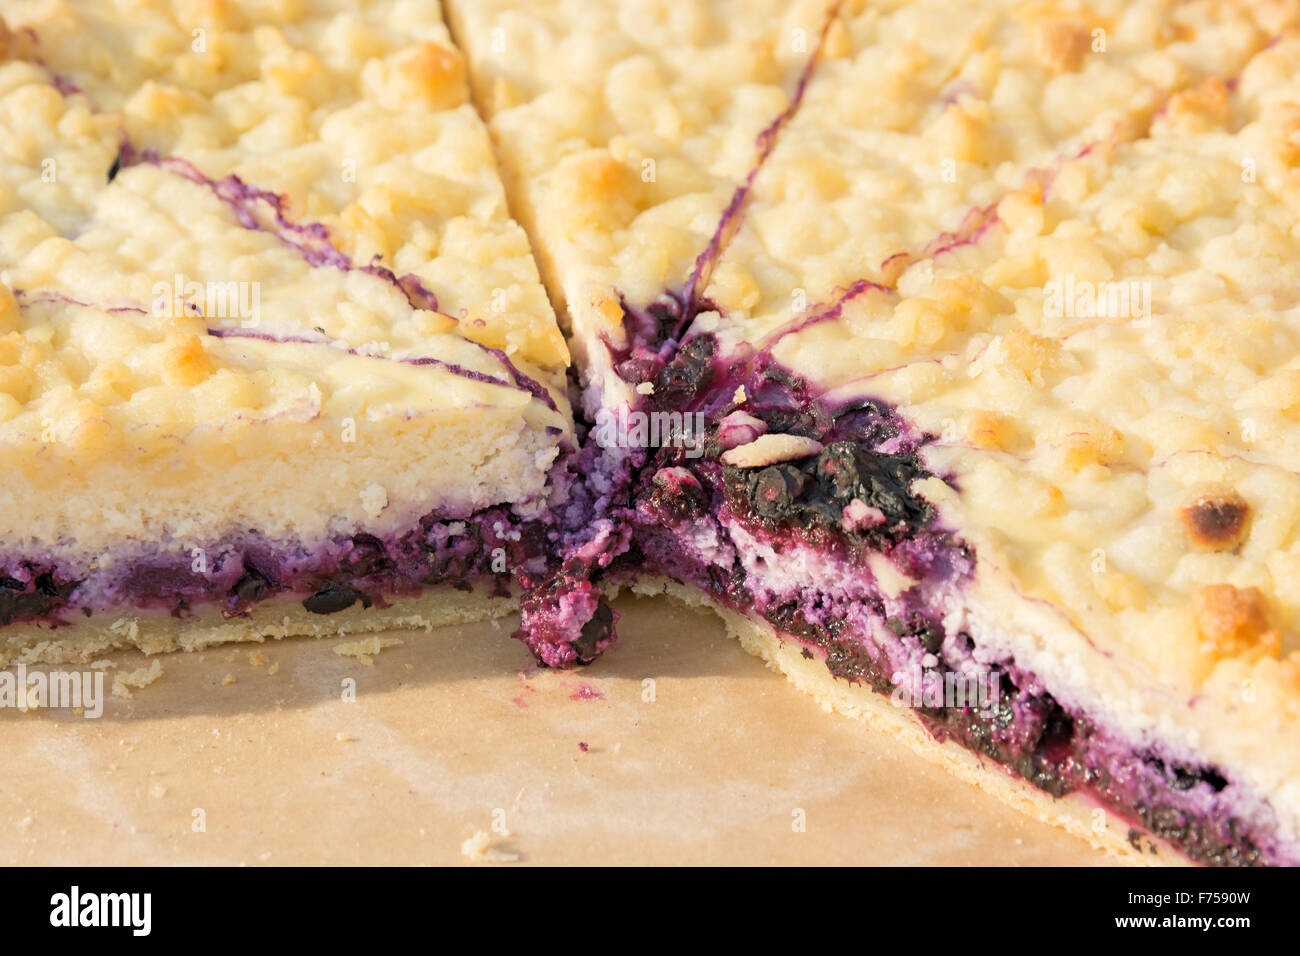 Homemade blueberry pie. Picture taken at the spring fair under the open sky on a sunny day. Close-up. Stock Photo